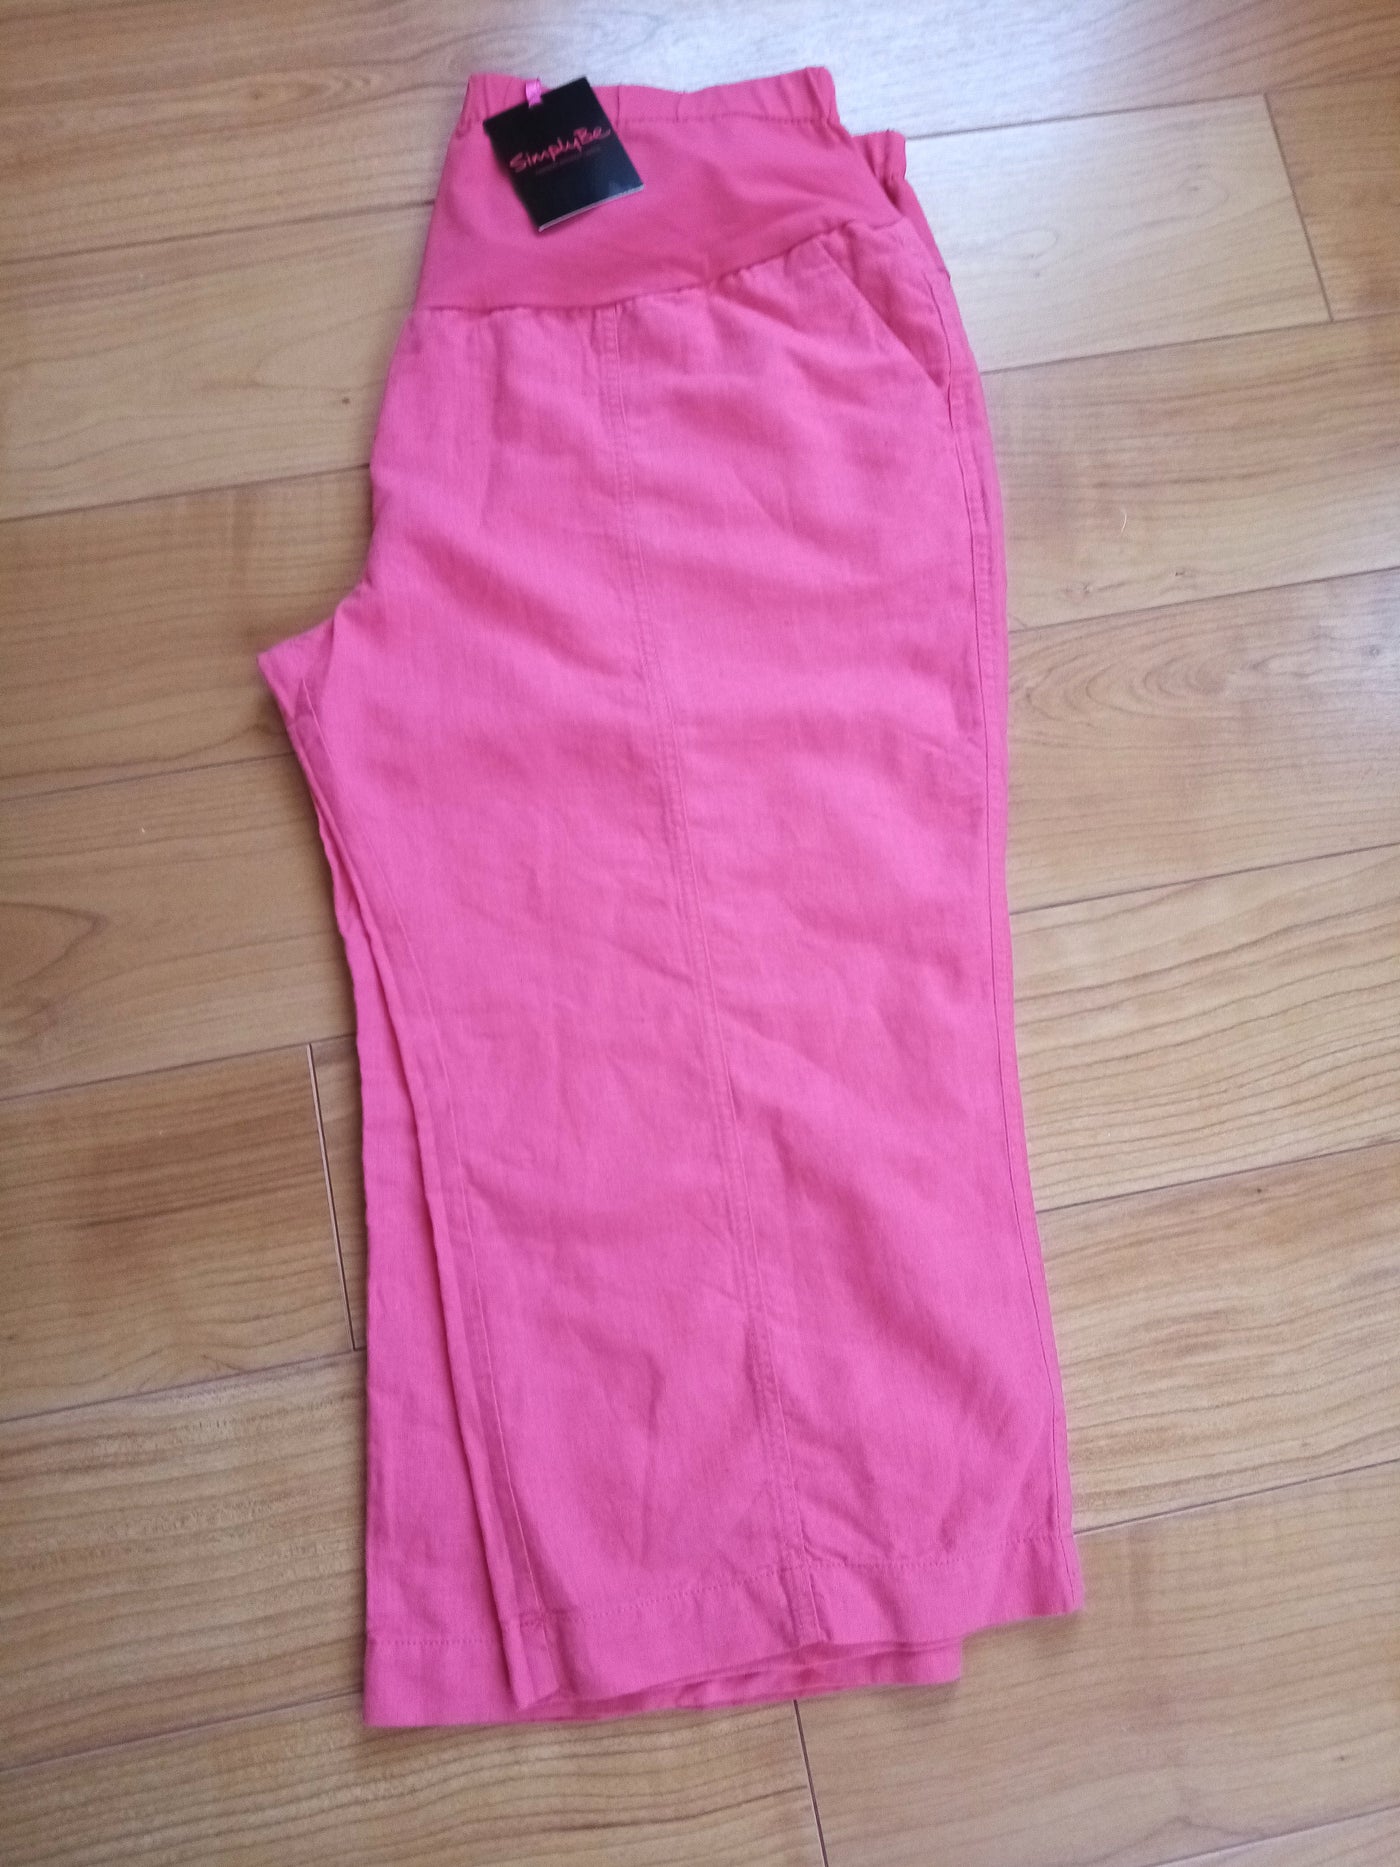 SimplyBe Maternity Coral Crop Linen Trousers (BNWT) - Size 20